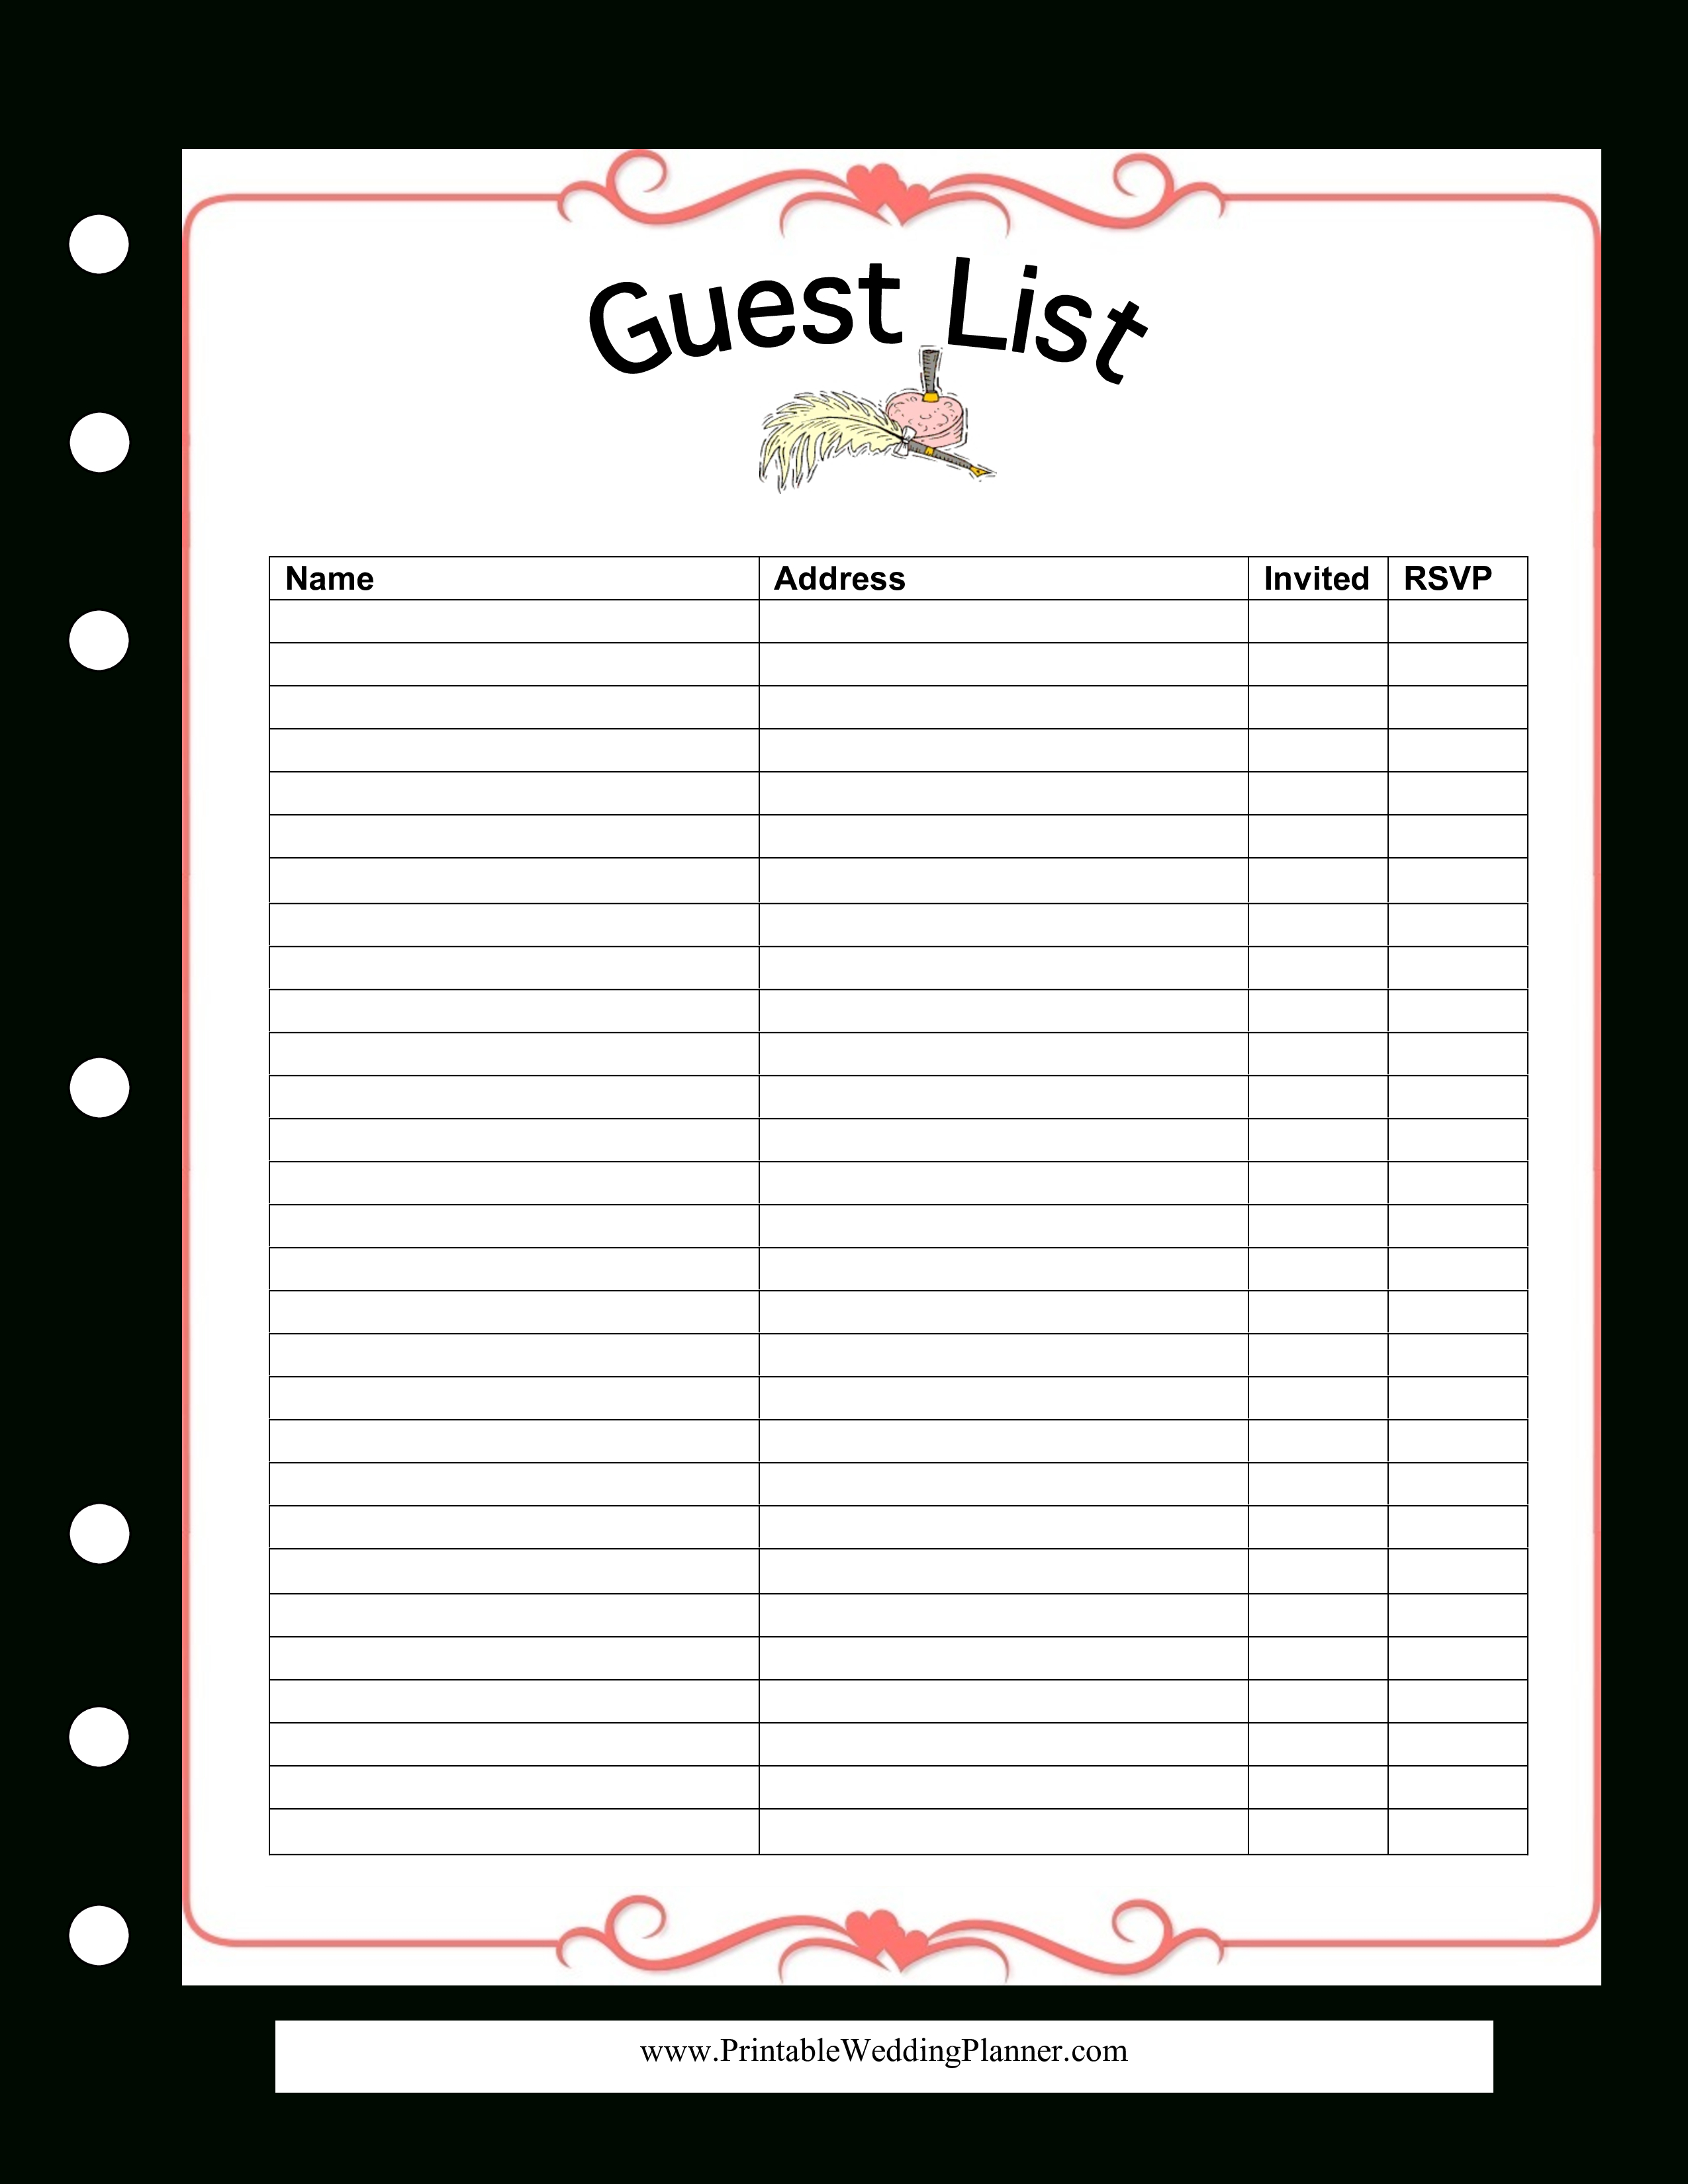 Guest List Spreadsheet In Free Wedding Guest List Spreadsheet  Templates At